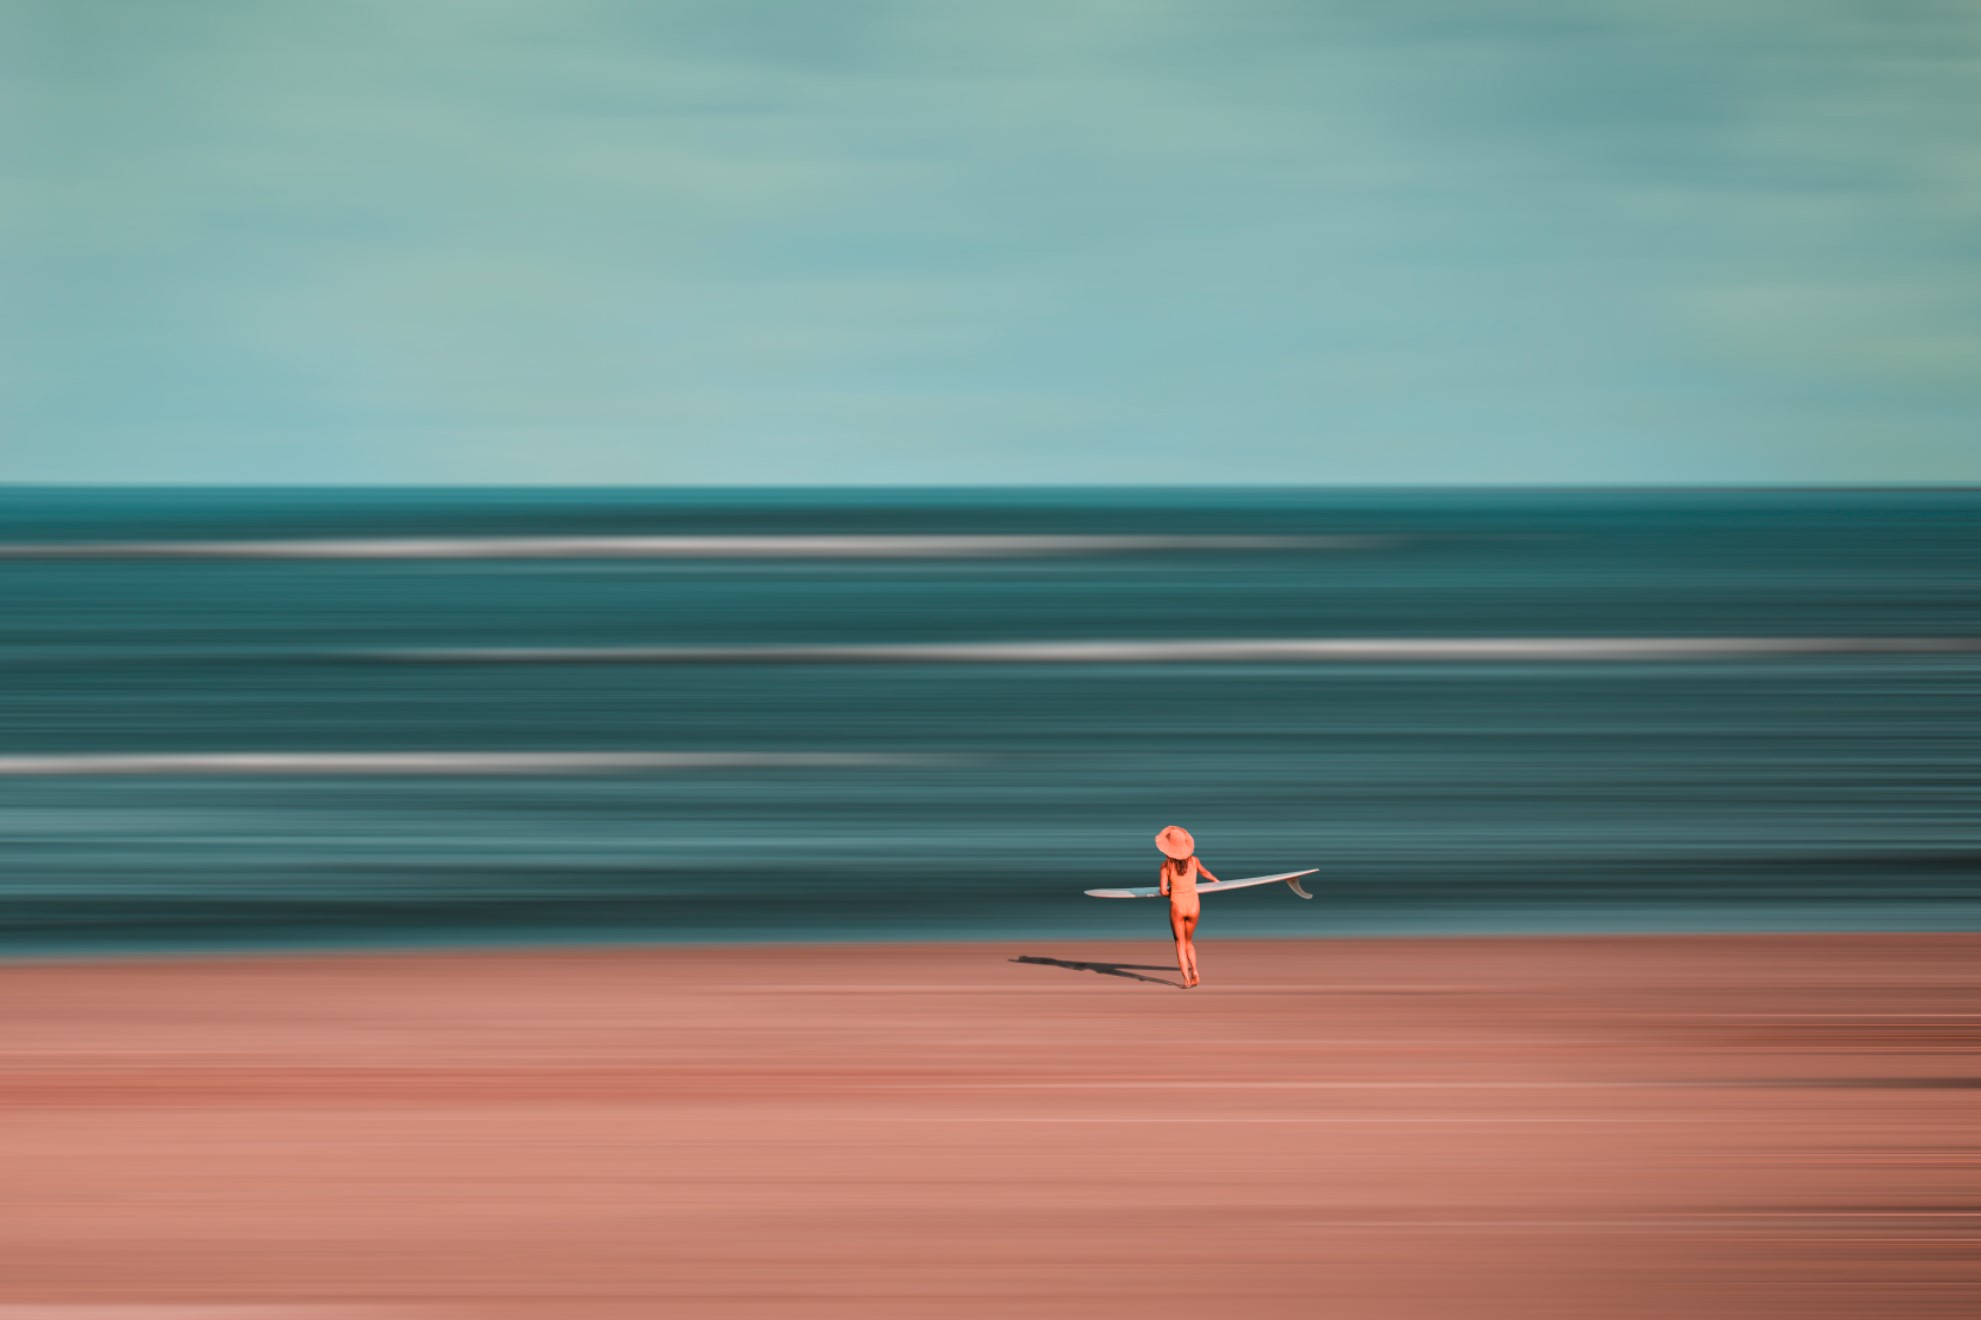 How To Turn Your Photos Into Fine Art - My Comprehensive Guide to Panning Editing